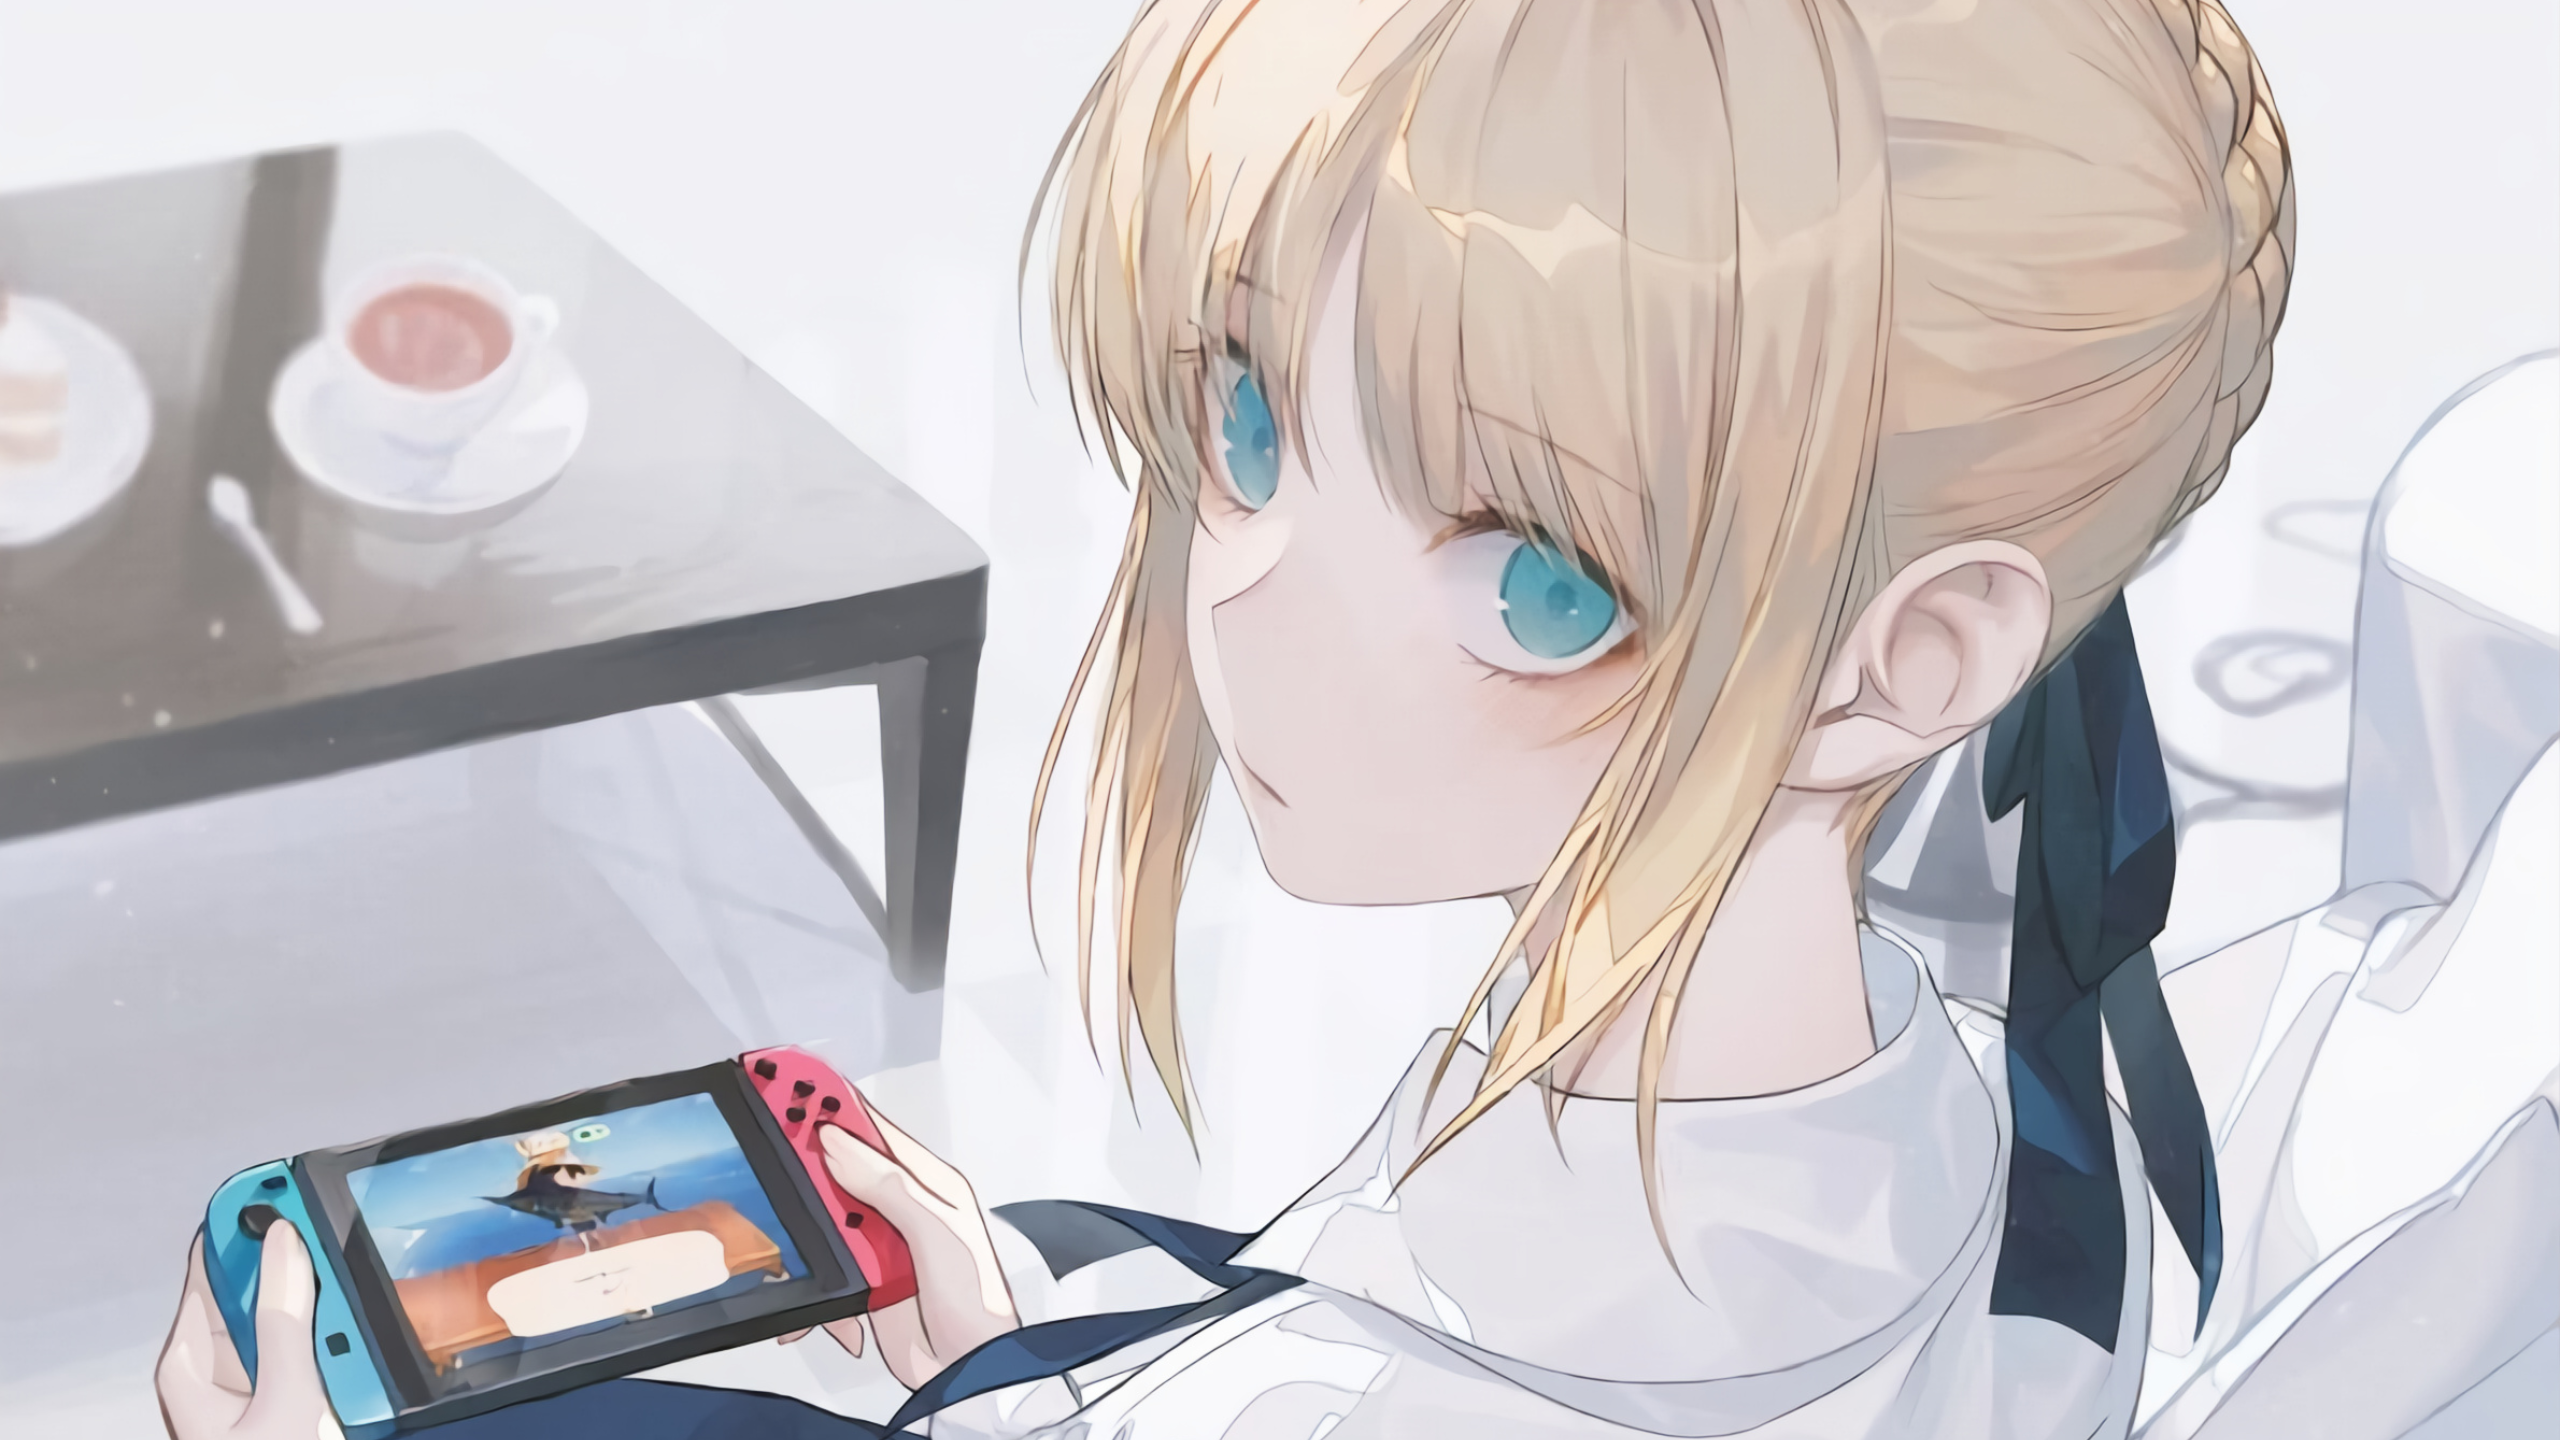 Saber Fate Series Blonde Anime Girls Looking At Viewer Nintendo Switch Anime Blue Eyes Fate Stay Nig 2560x1440